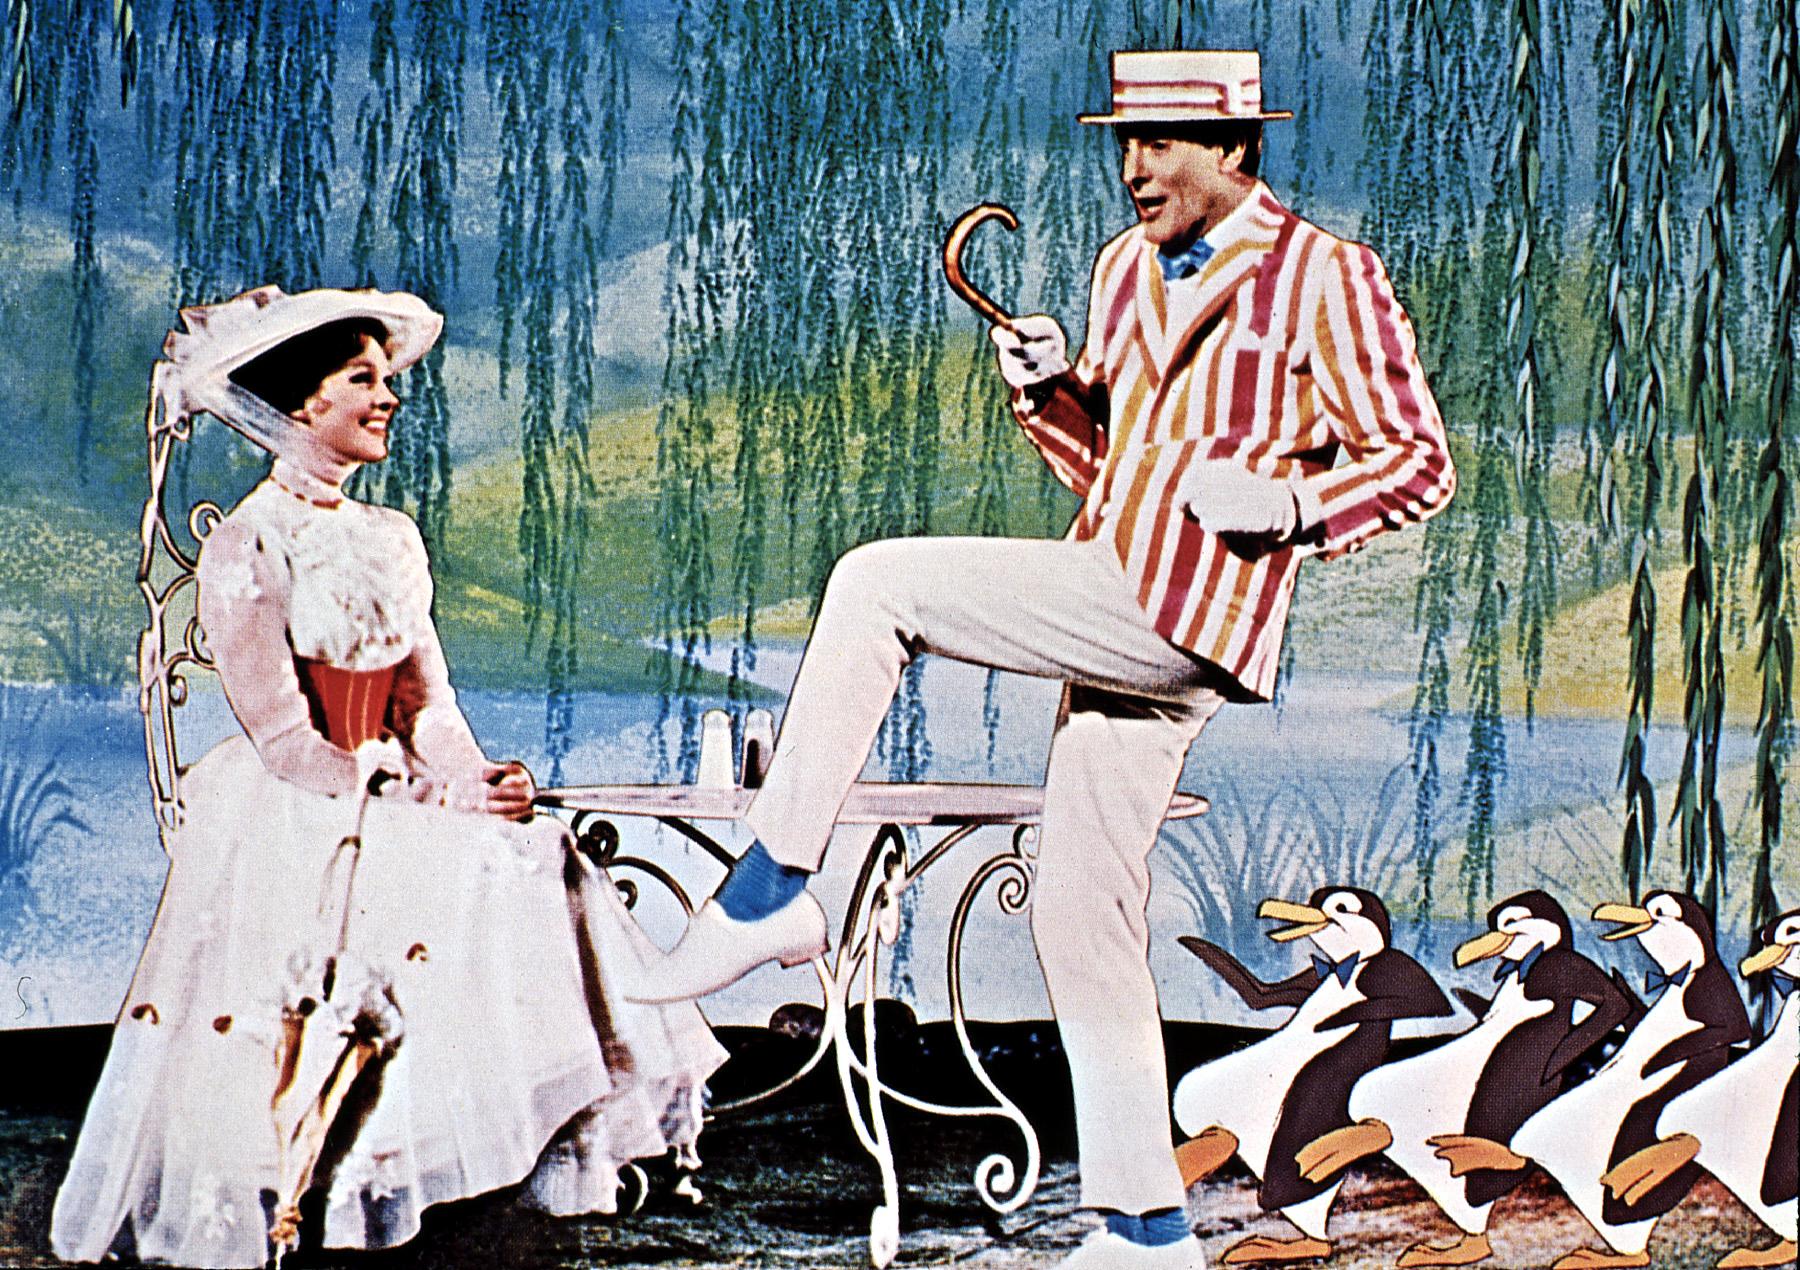 Dick van Dyke and Julie Andrews perform a scene from the Disney Mary Poppins movie